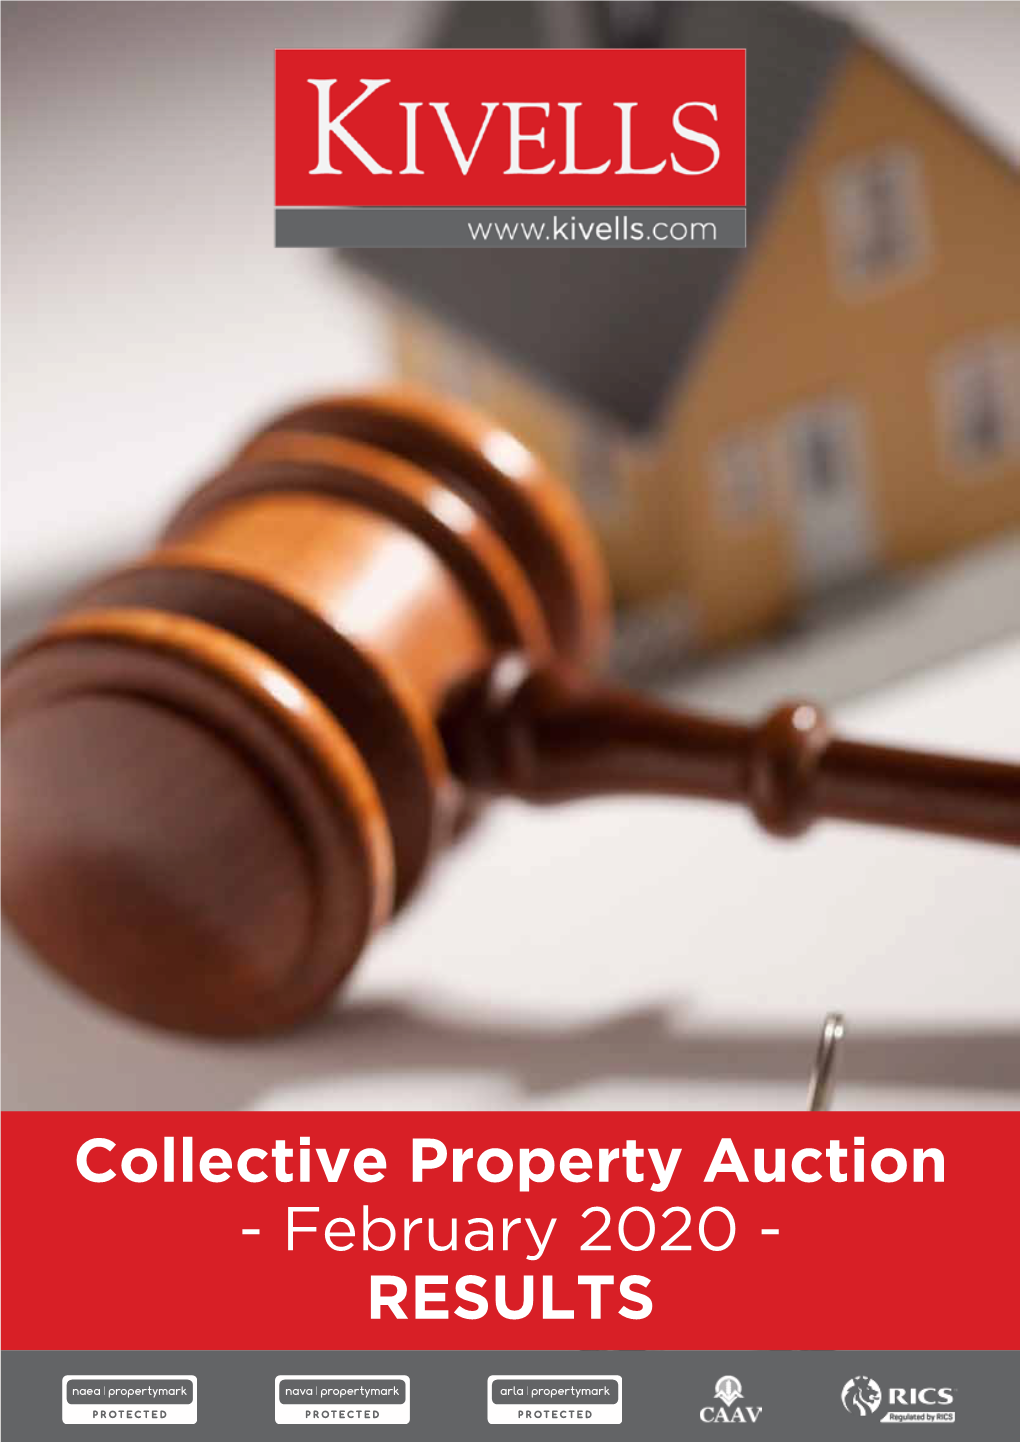 Collective Property Auction - February 2020 - RESULTS Why Choose Kivells?